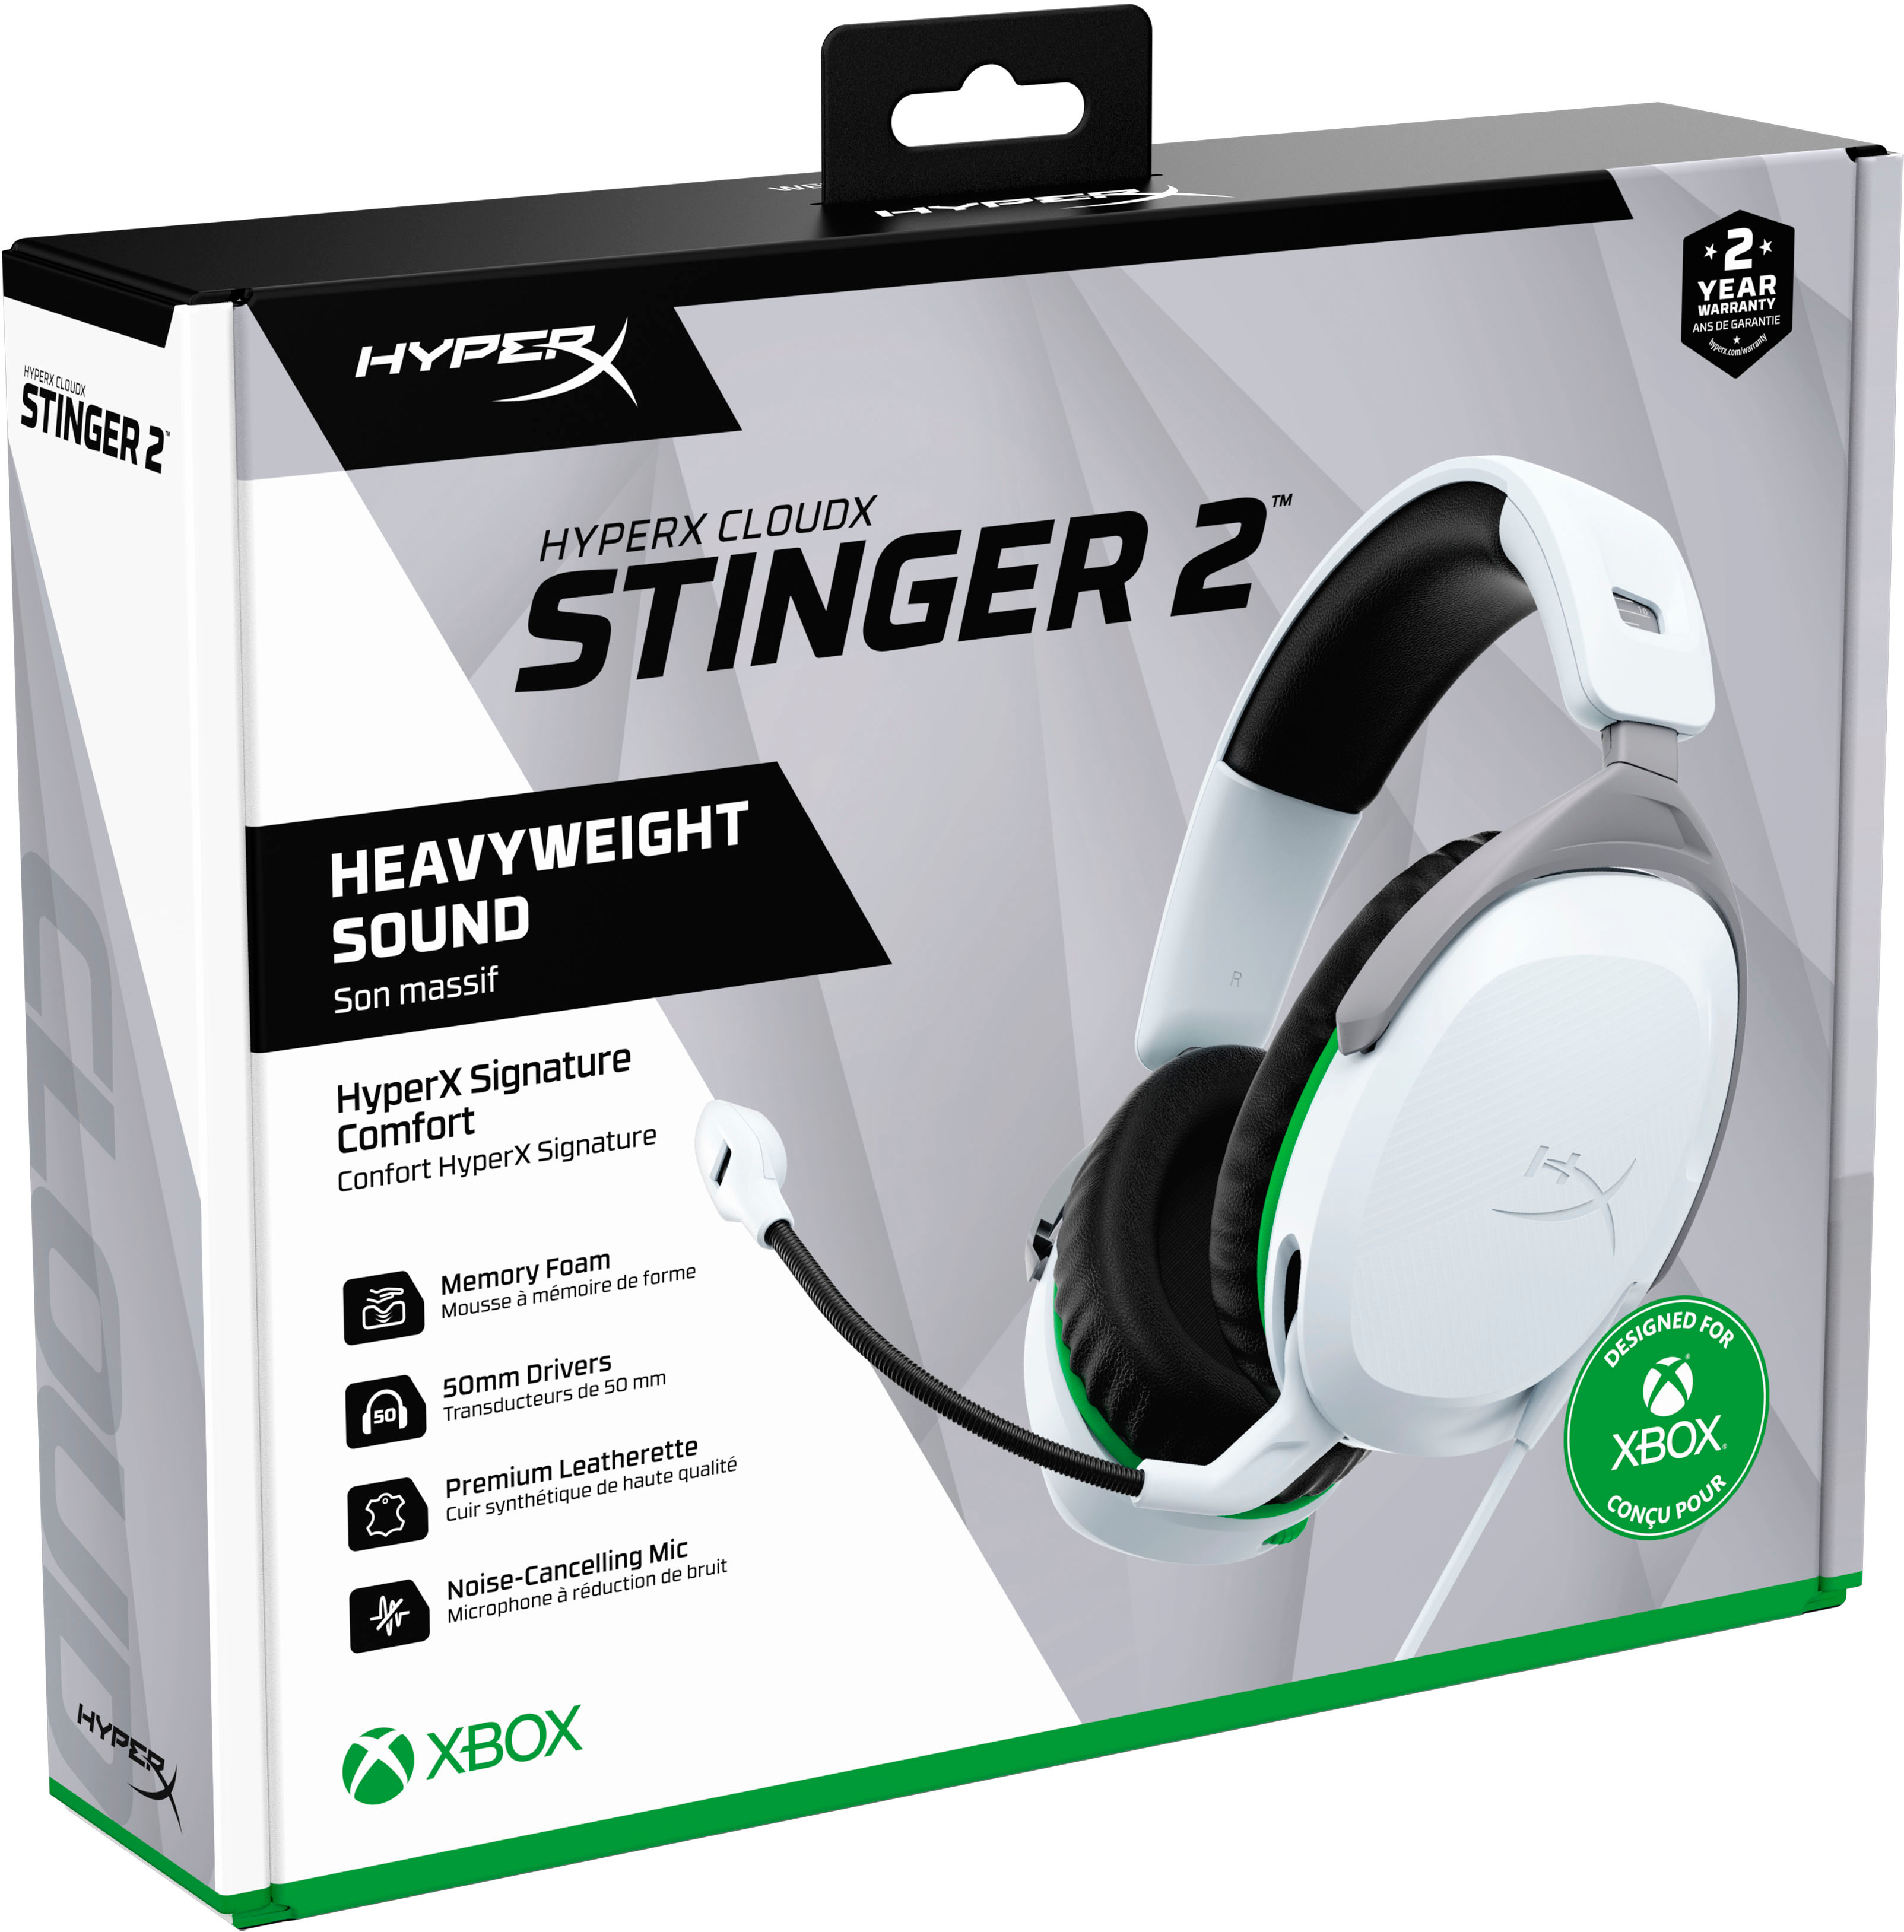 Wired Best 2 CloudX Stinger Xbox Buy for Headset Gaming 75X28AA HyperX White -